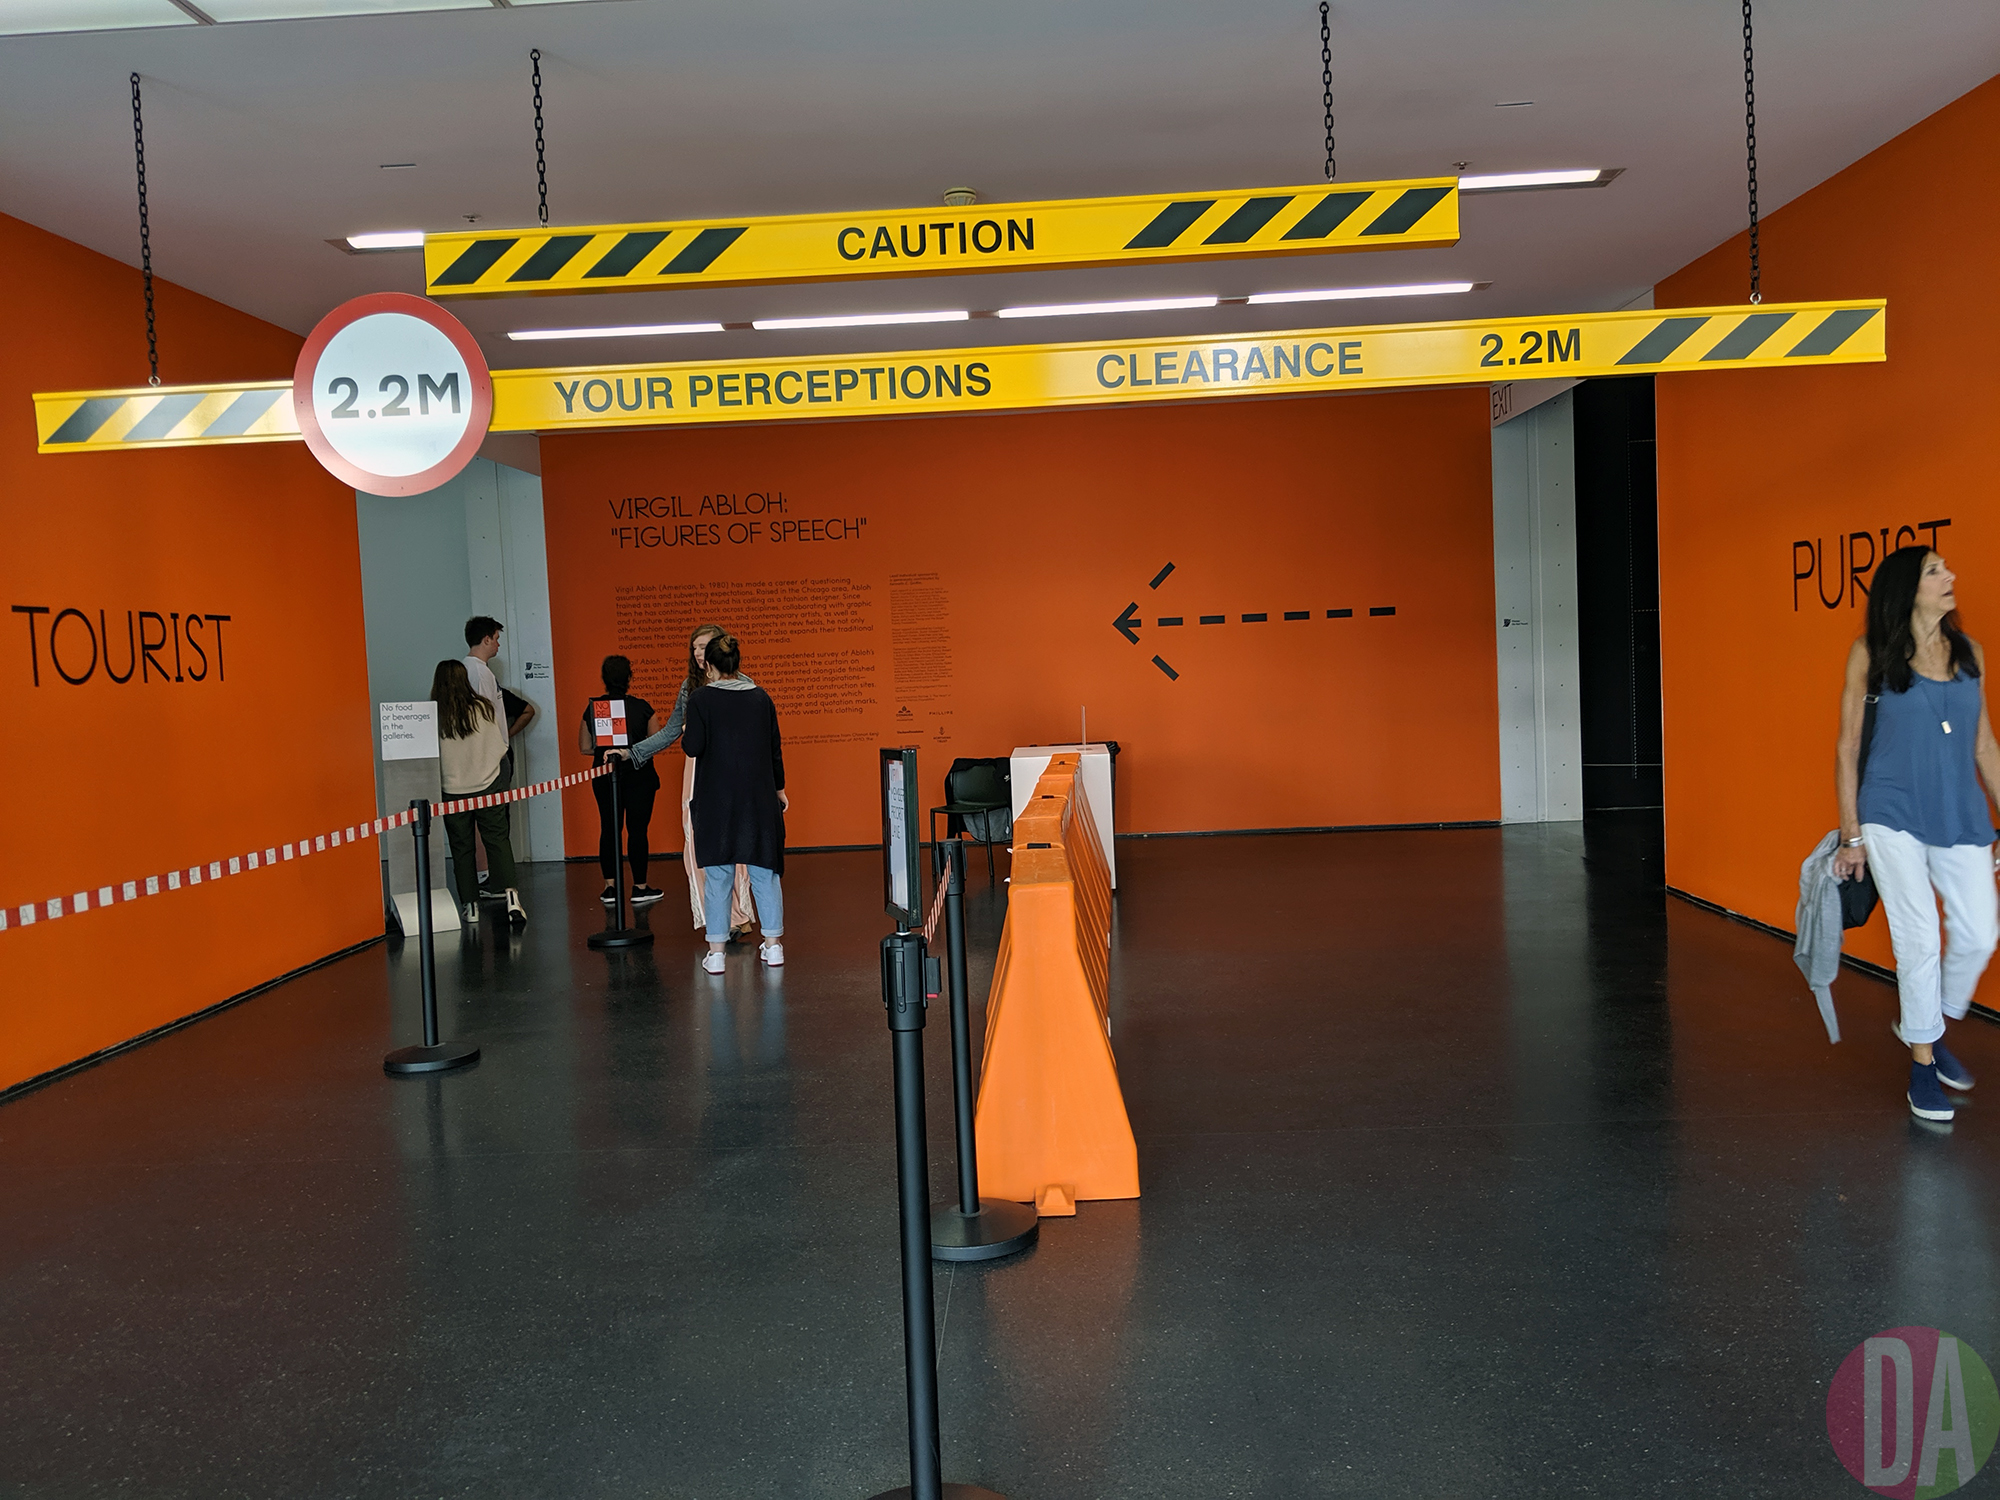 Louis Vuitton Goes Orange For a Collection Linked to Virgil Abloh's MCA  Chicago Exhibit - The Source